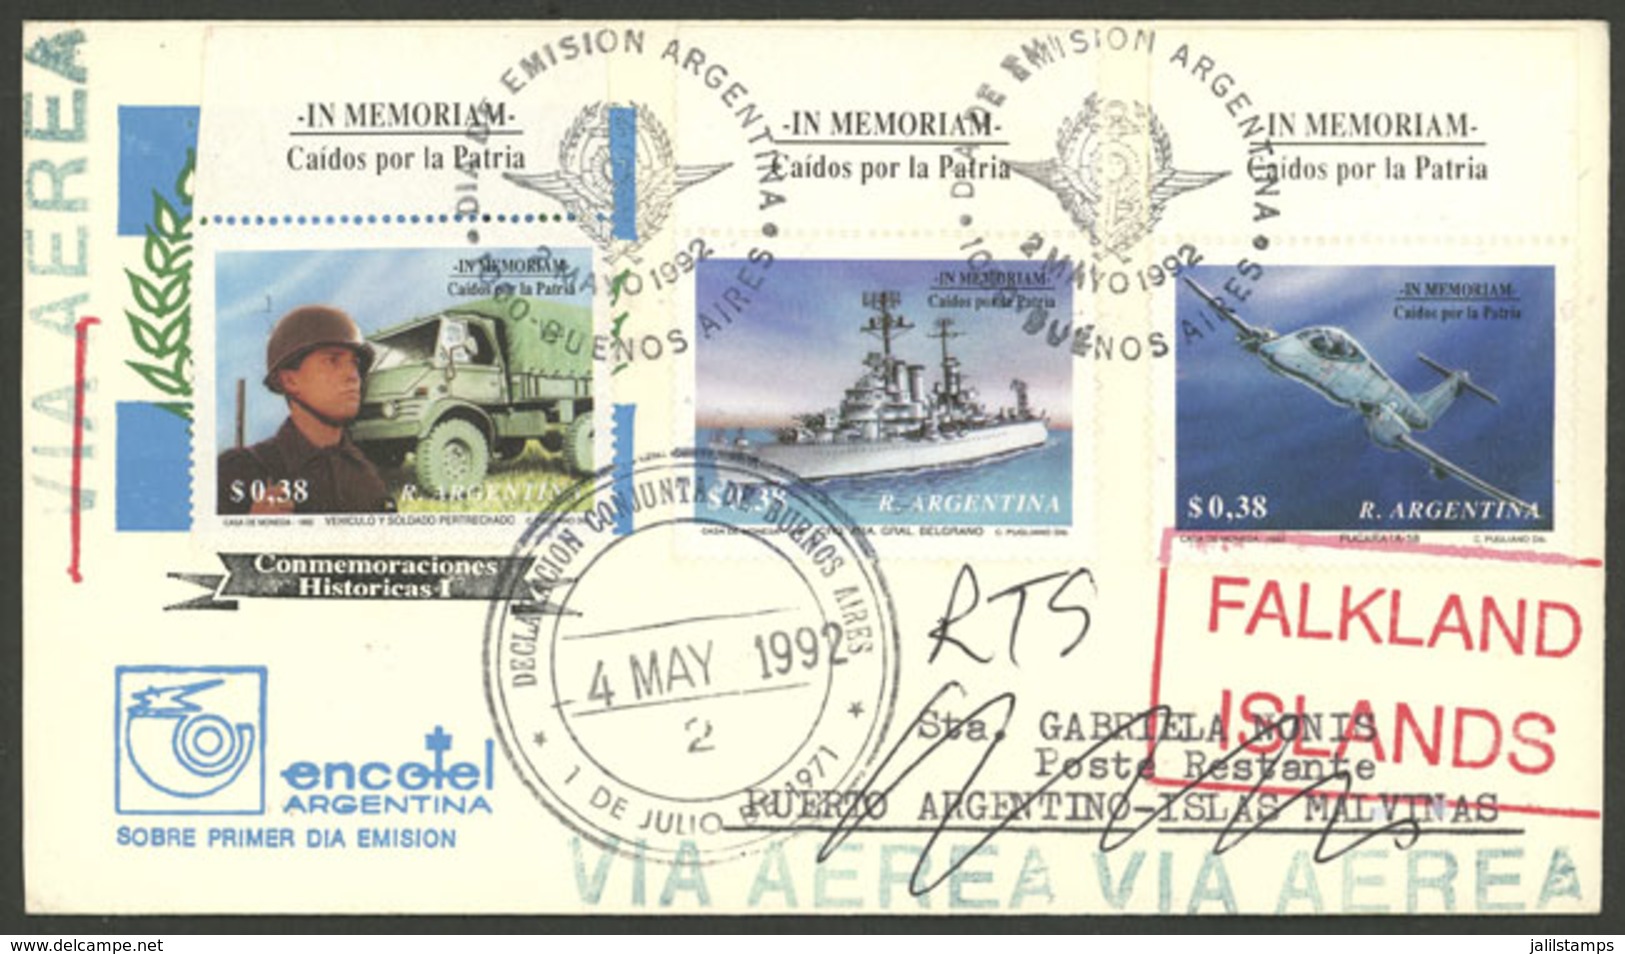 FALKLAND ISLANDS/MALVINAS: Cover Sent From Buenos Aires To "Puerto Argentino - Islas Malvinas" On 2/MAY/1922, With Hands - Falkland